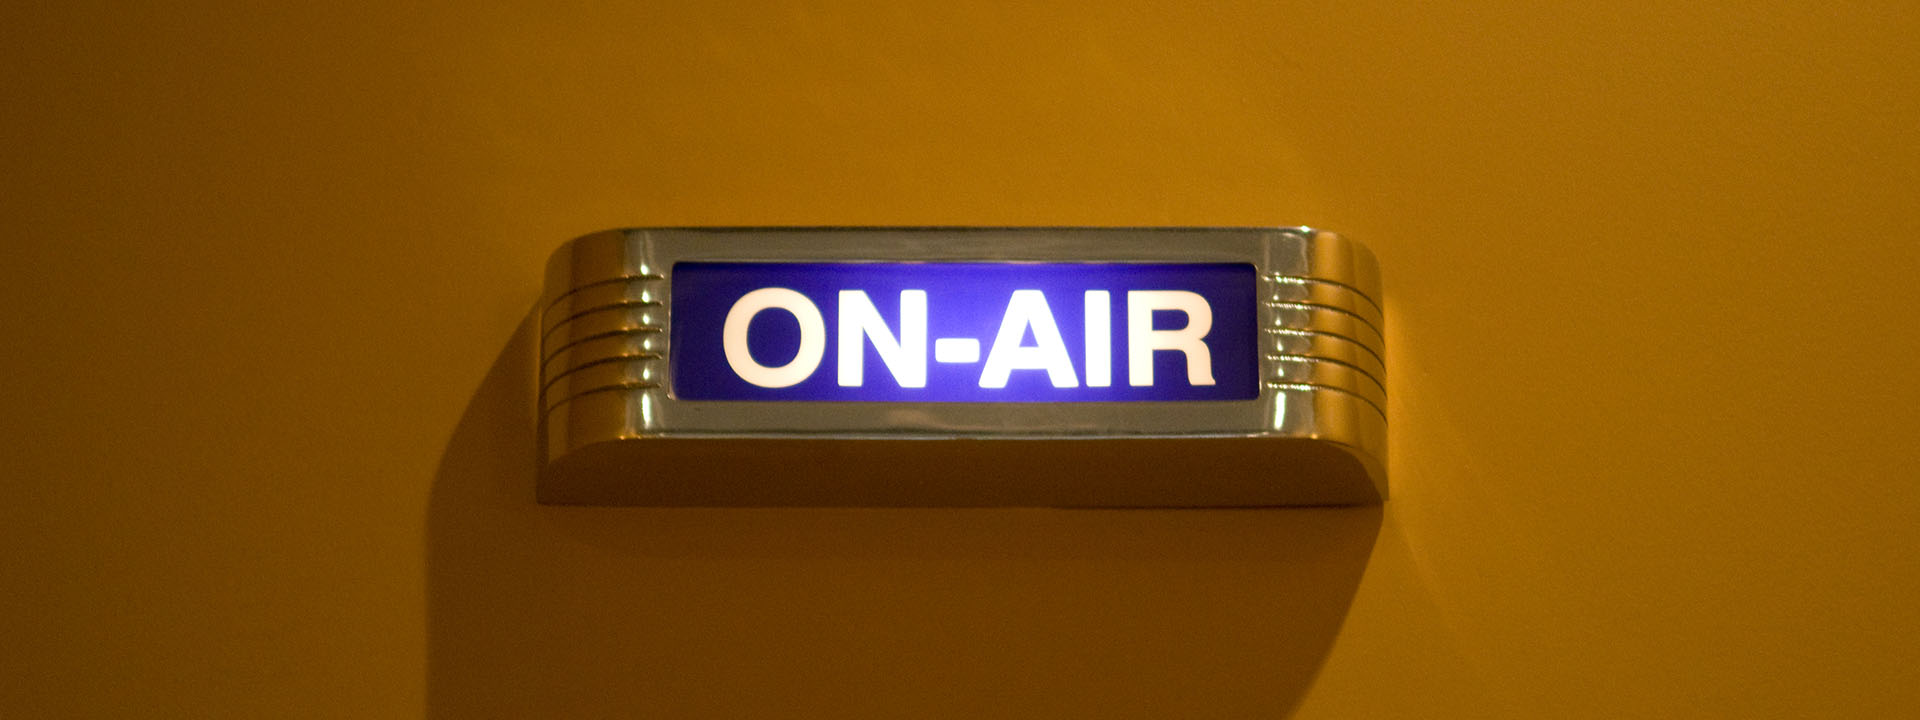 ON-AIR sign